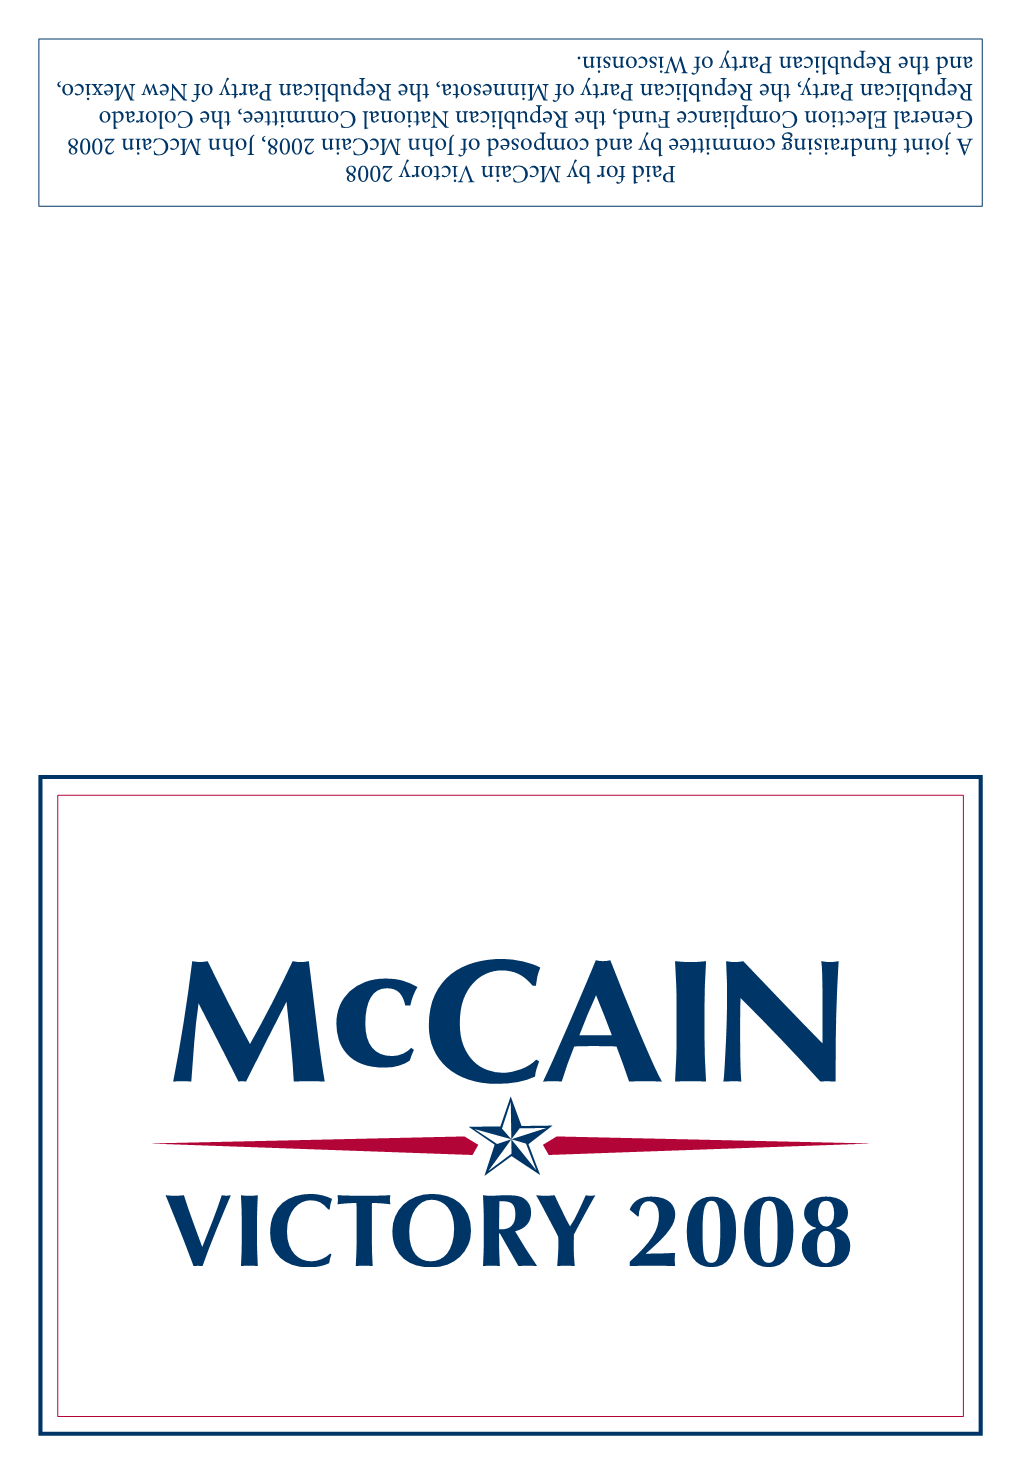 Paid for by Mccain Victory 2008 a Joint Fundraising Committee by and Composed of John Mccain 2008, John Mccain 2008 General Elec